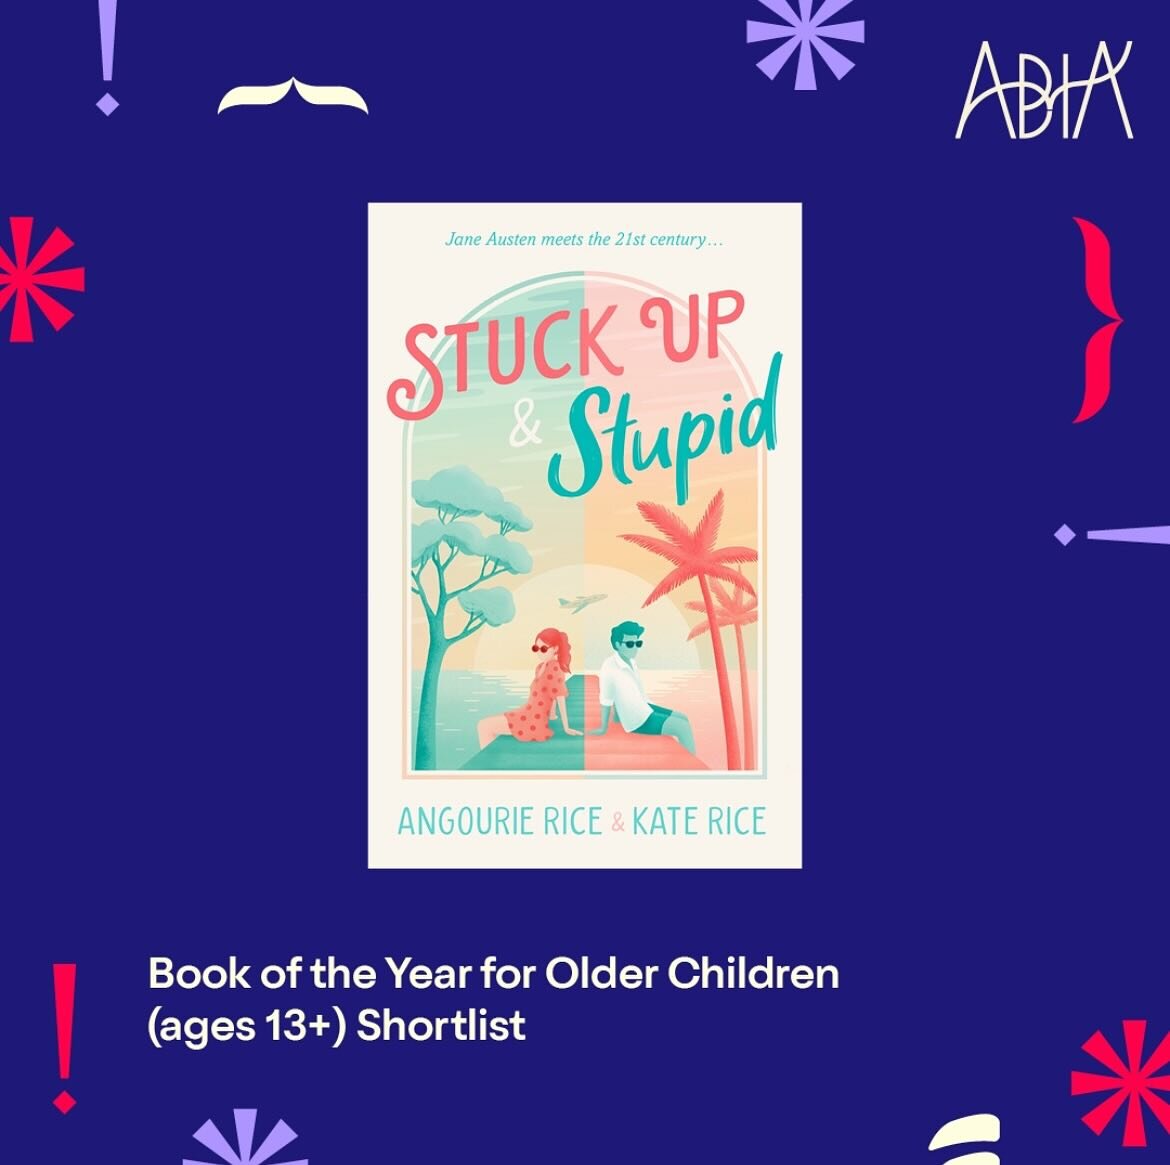 @abia_awards Shortlist Book of The Year for Older Children (+13) 🎉 @katericewriter @angourierice @the_community_library @walkerbooksaus 🌟Publisher: @clarehallifax